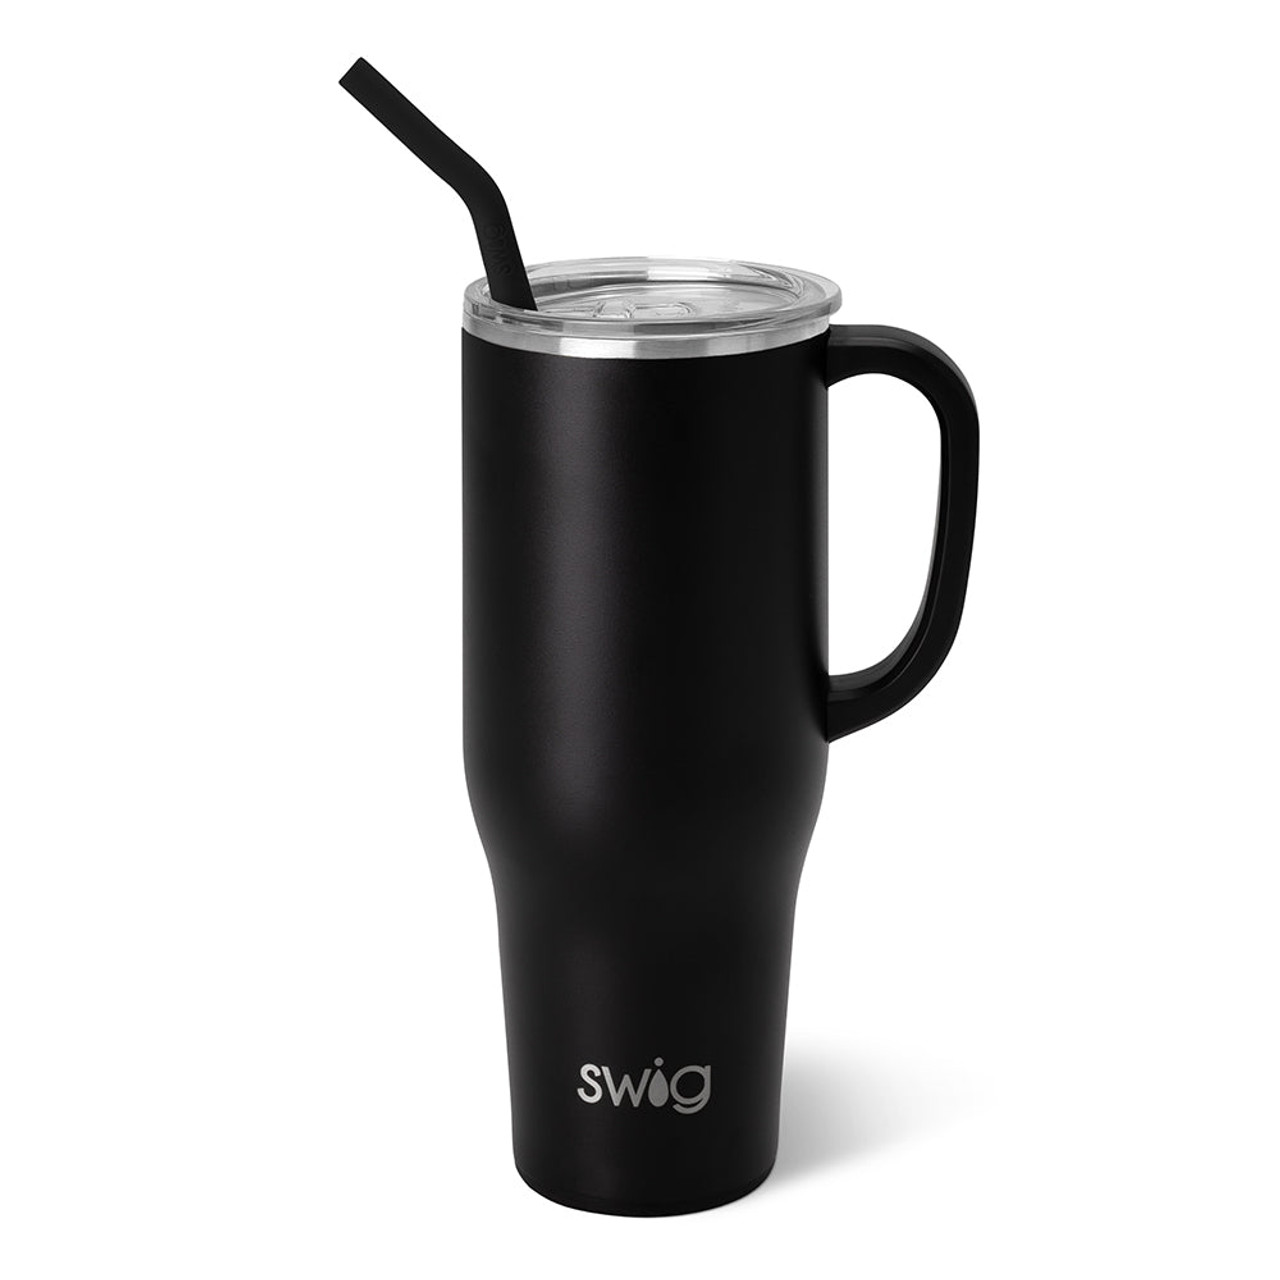 https://cdn11.bigcommerce.com/s-yhl8wqmxu2/images/stencil/1280x1280/products/83890/48204/swig-life-signature-40oz-insulated-stainless-steel-mega-mug-with-handle-black-main__45513.1679932749.jpg?c=2